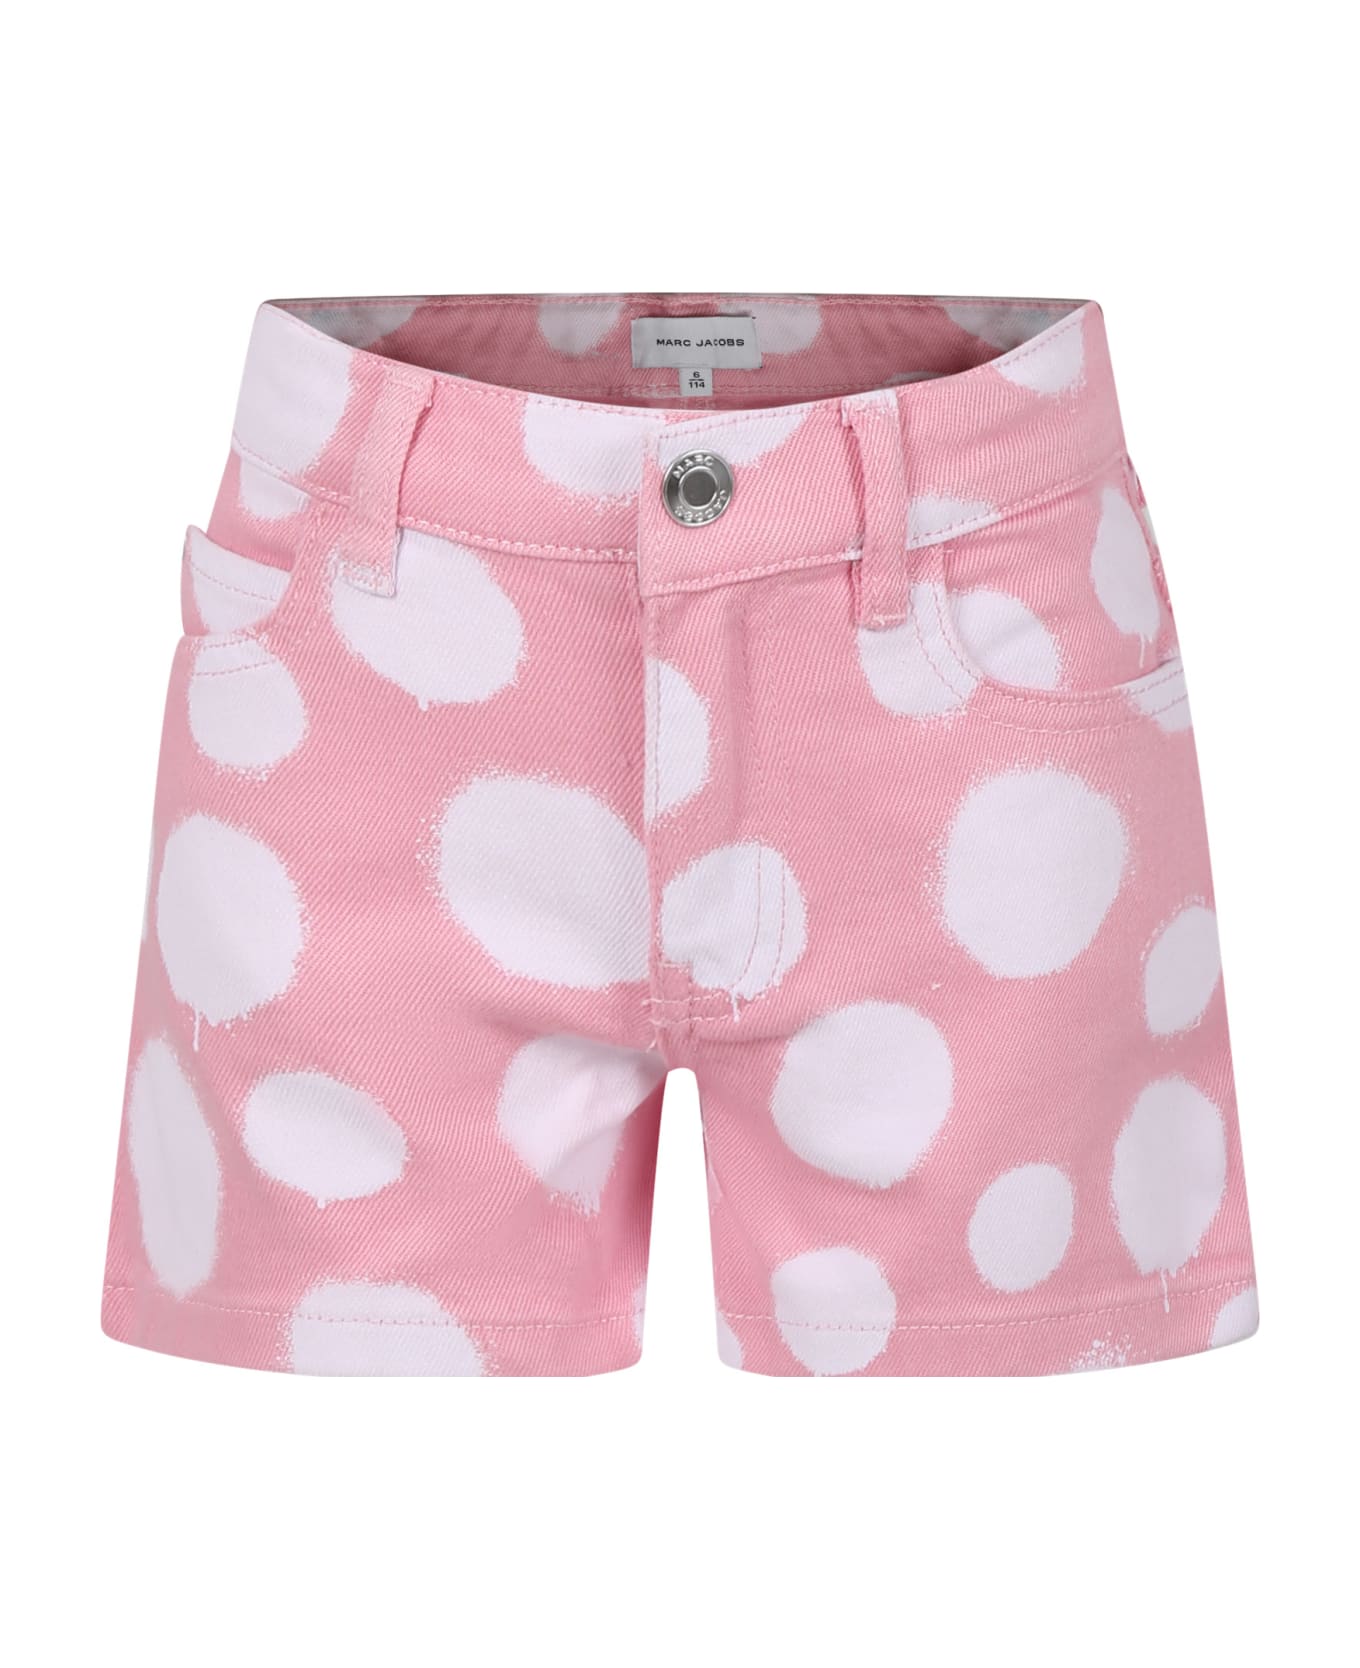 Marc Jacobs Pink Shorts For Girl With All-over Polka Dots - Pink ボトムス